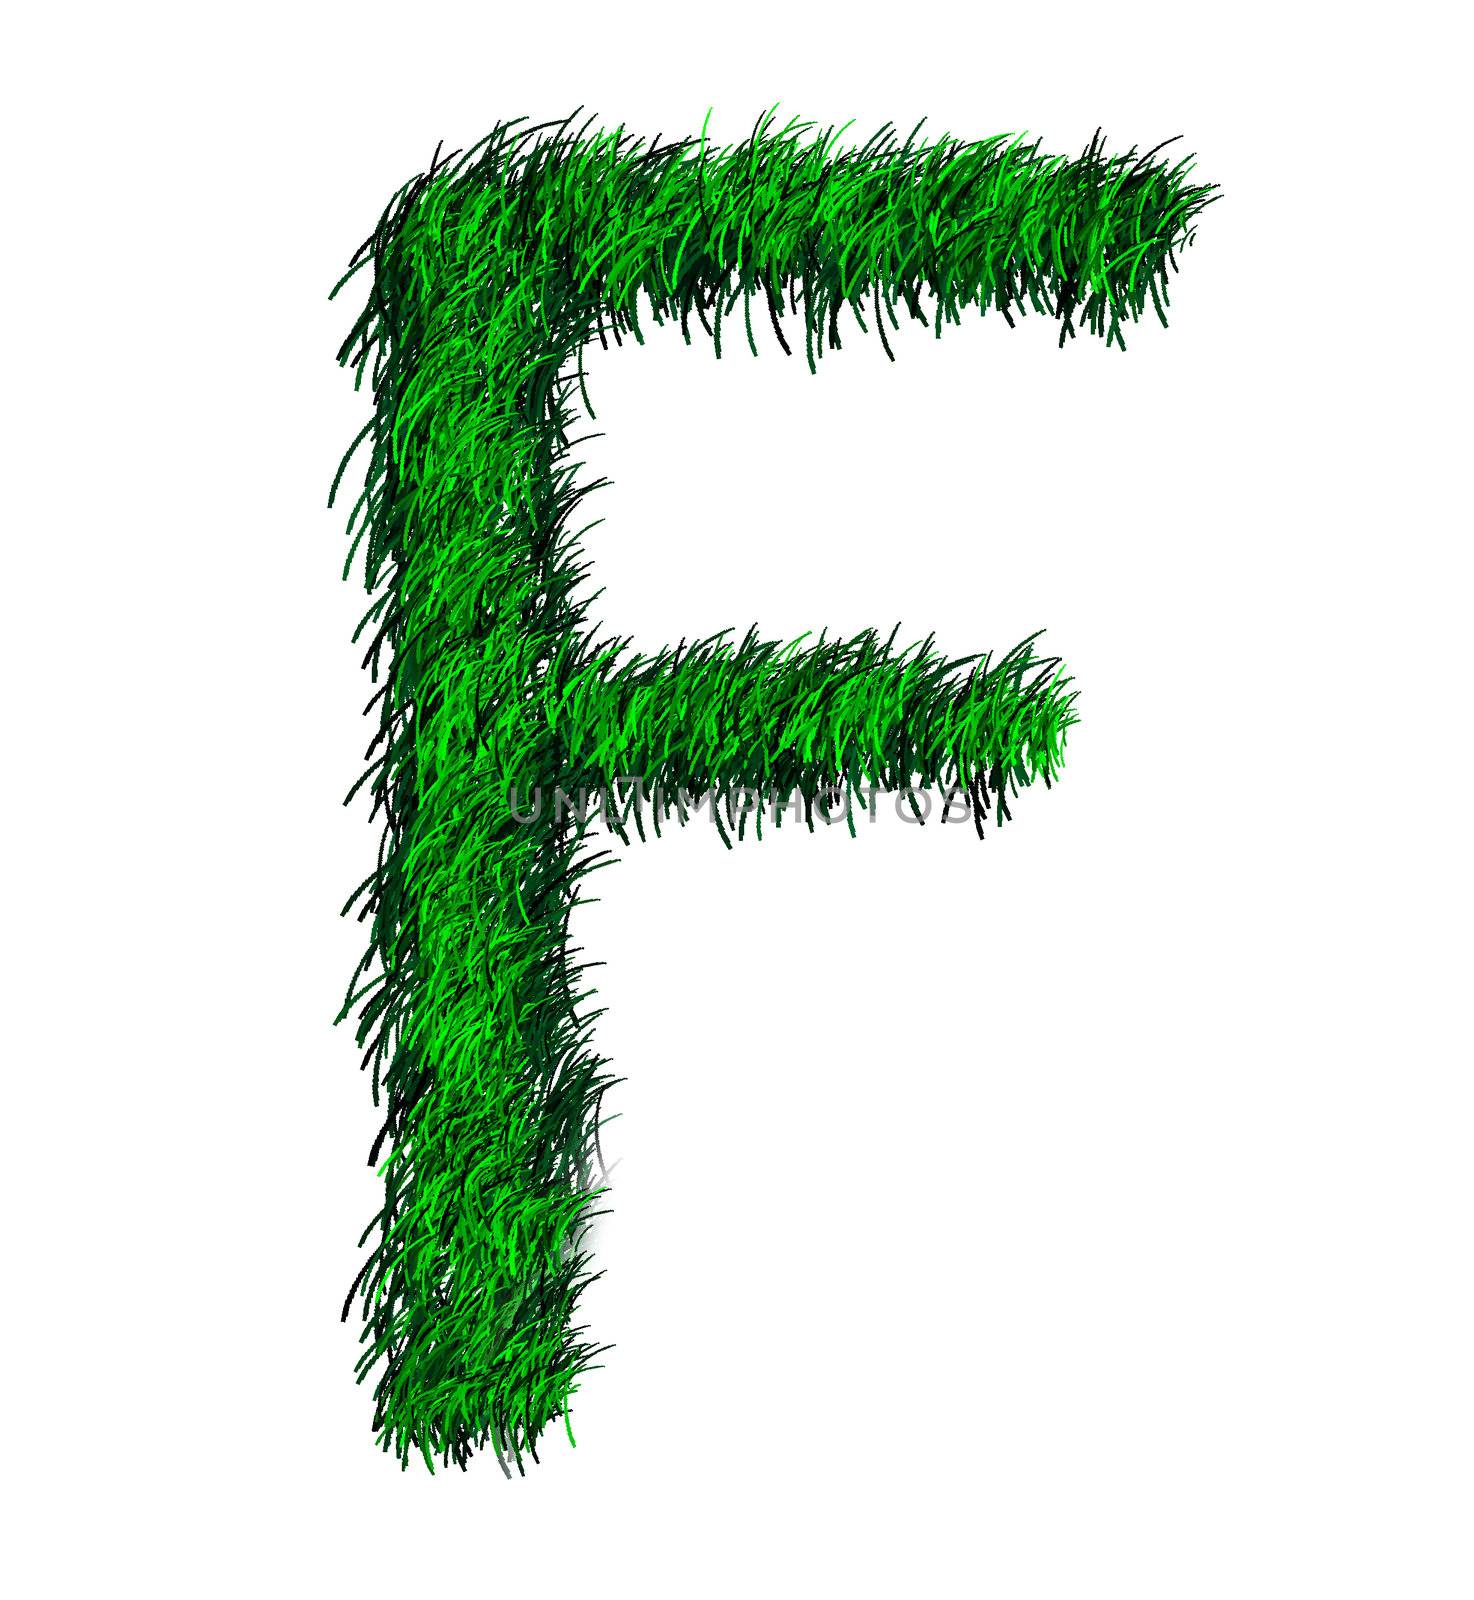 Computer graphic as one alphabet of green grass.